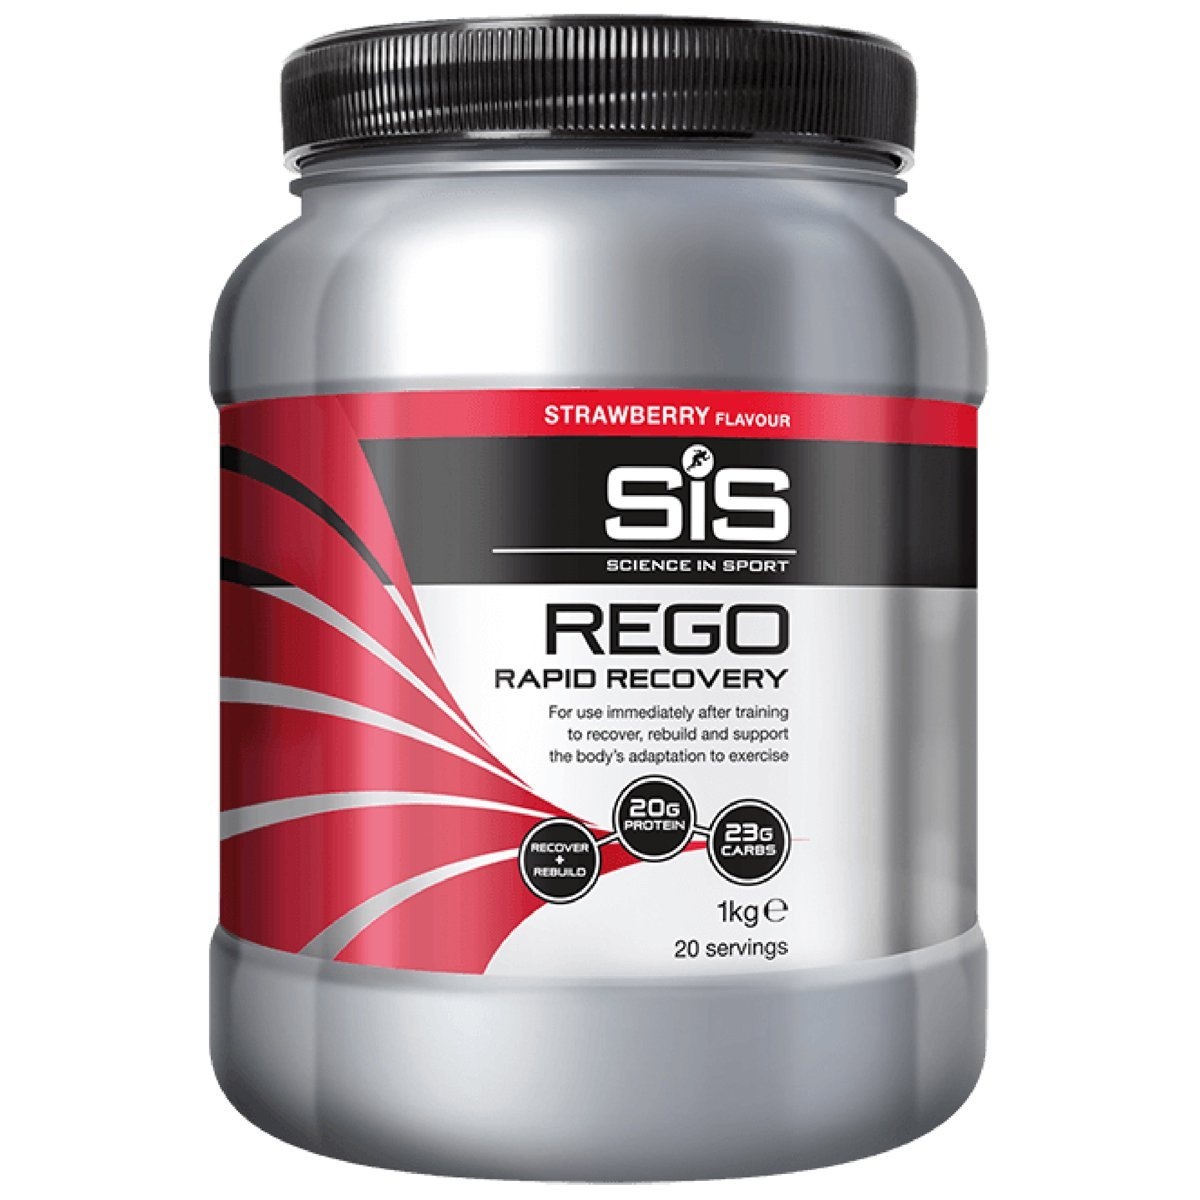  - SIS Rego Rapid Recovery Strawberry - 1kg